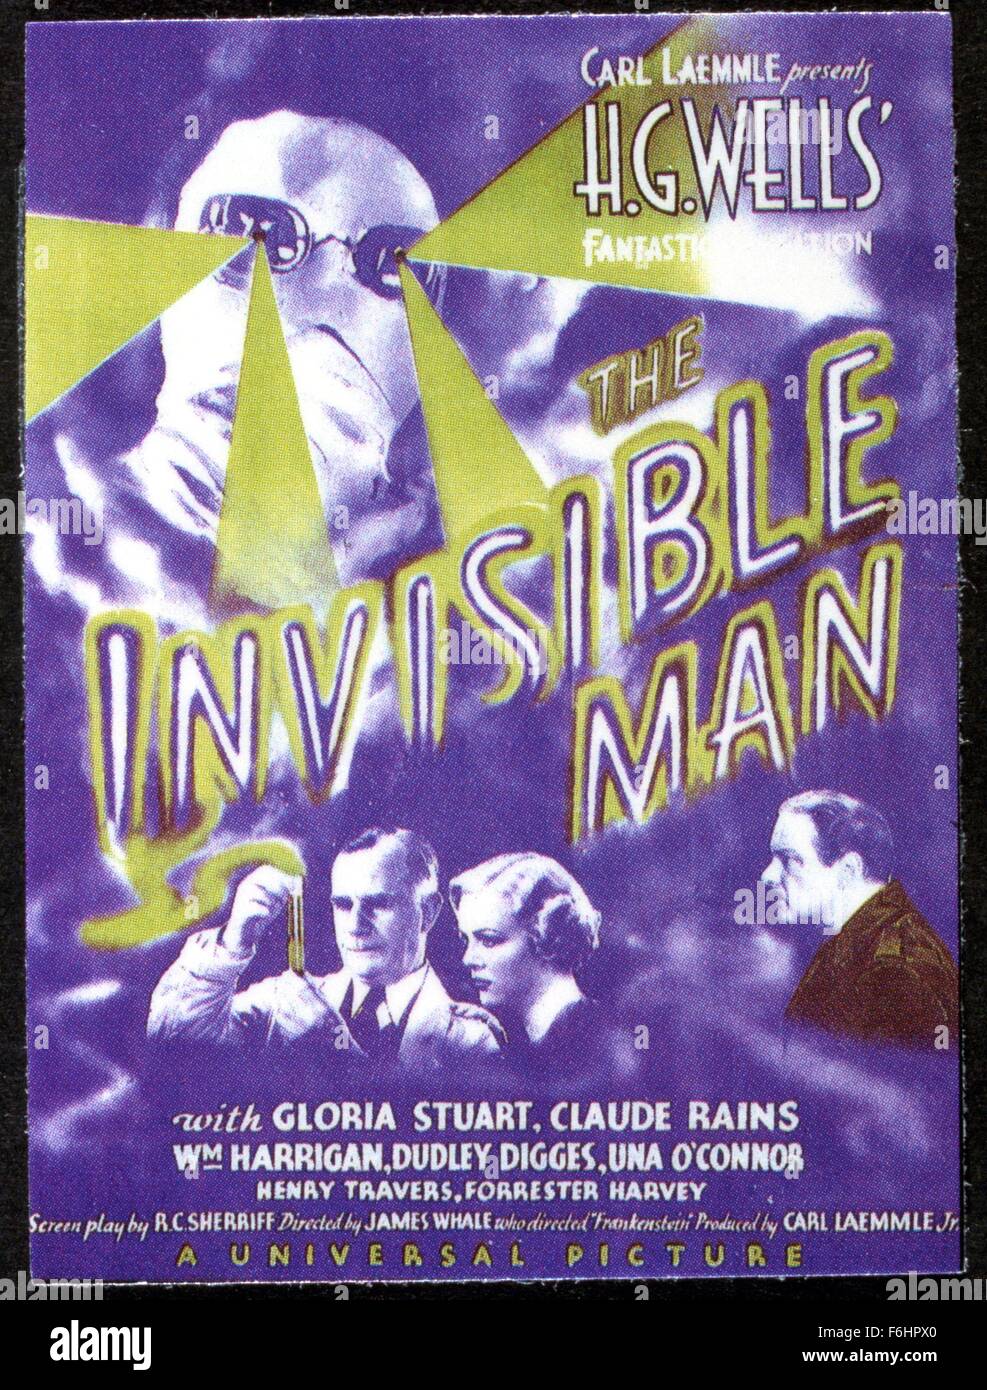 1933, Film Title: INVISIBLE MAN, Director: JAMES WHALE, Studio: UNIV, Pictured: ITS & ALIENS! THINGS, POSTER ART, GLASSES, SCI-FI. (Credit Image: SNAP) Stock Photo